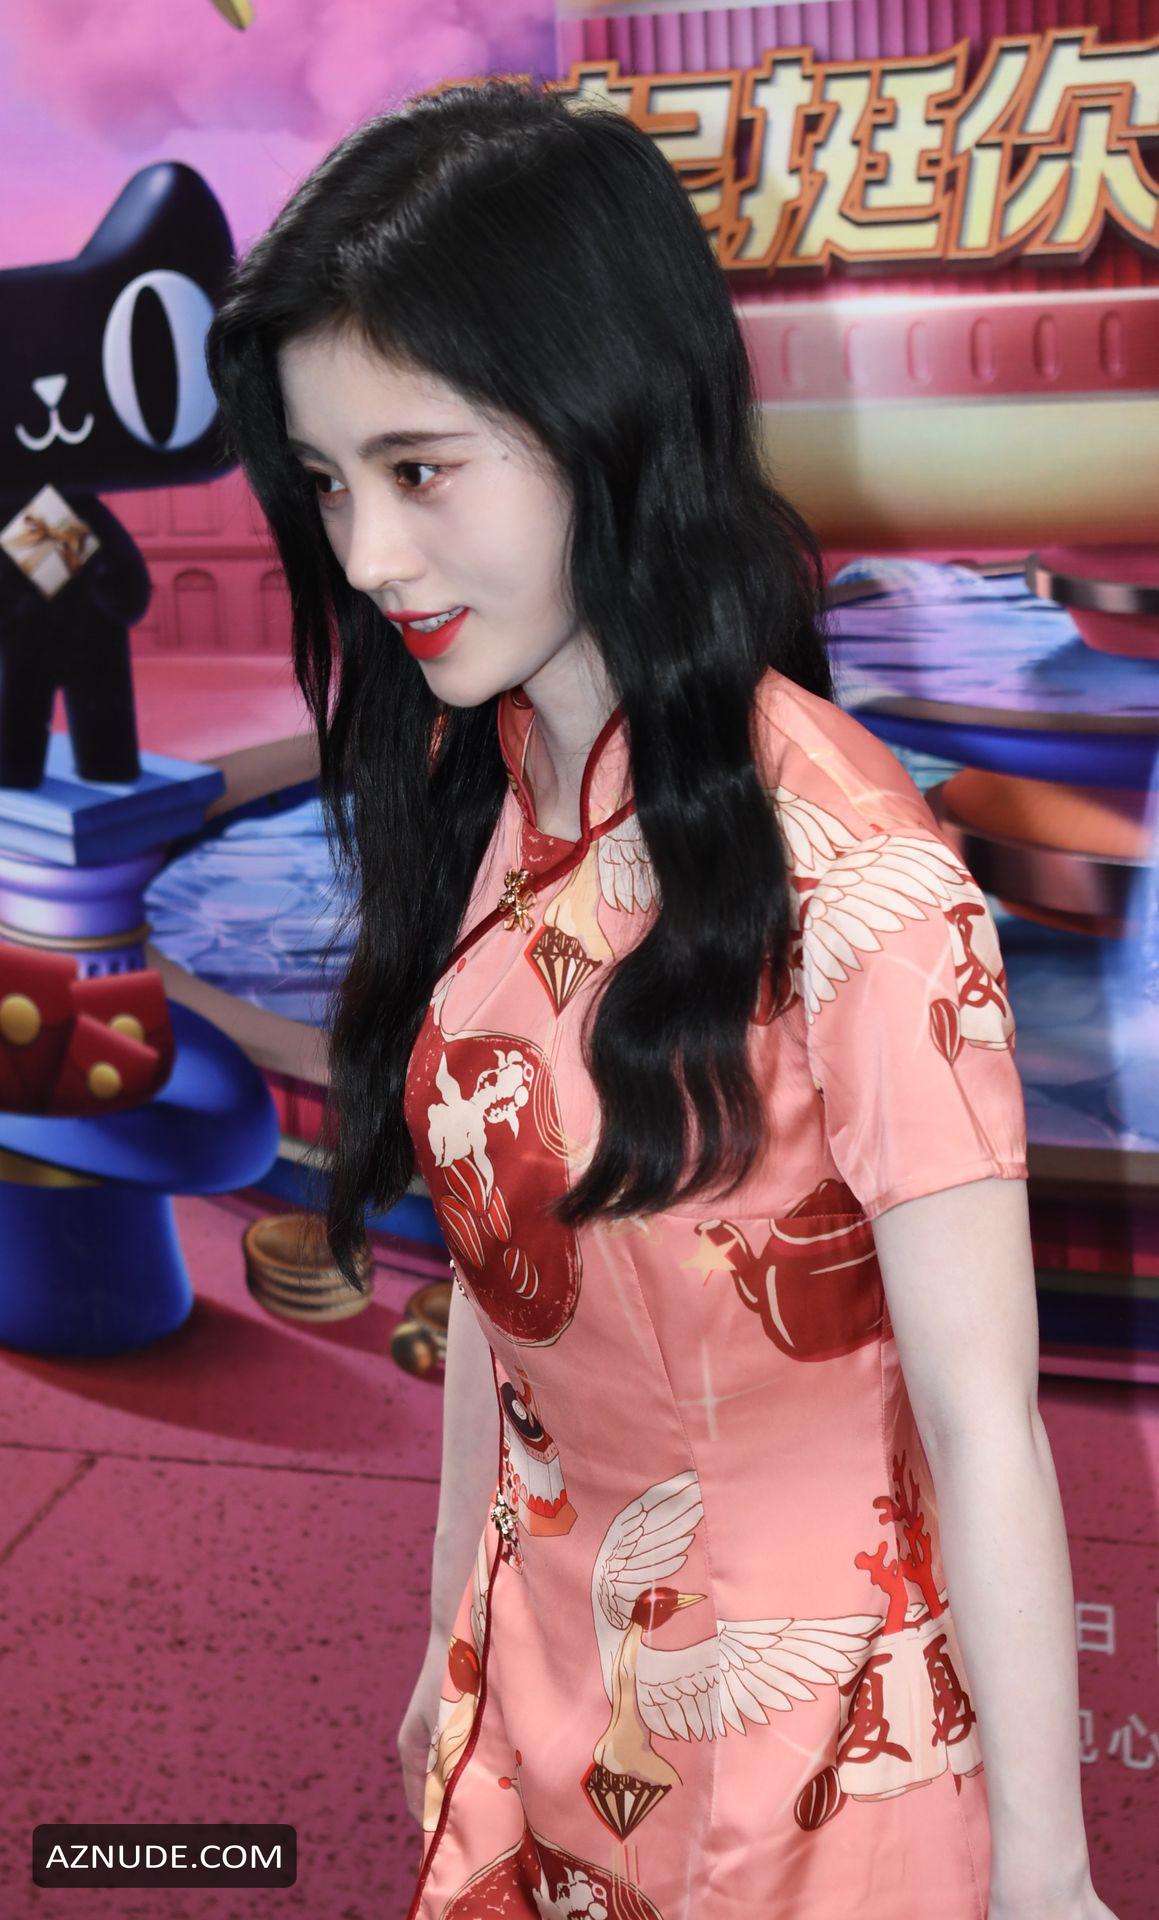 Ju Jingyi Attends A Promotional Event In Shanghai China Aznude 